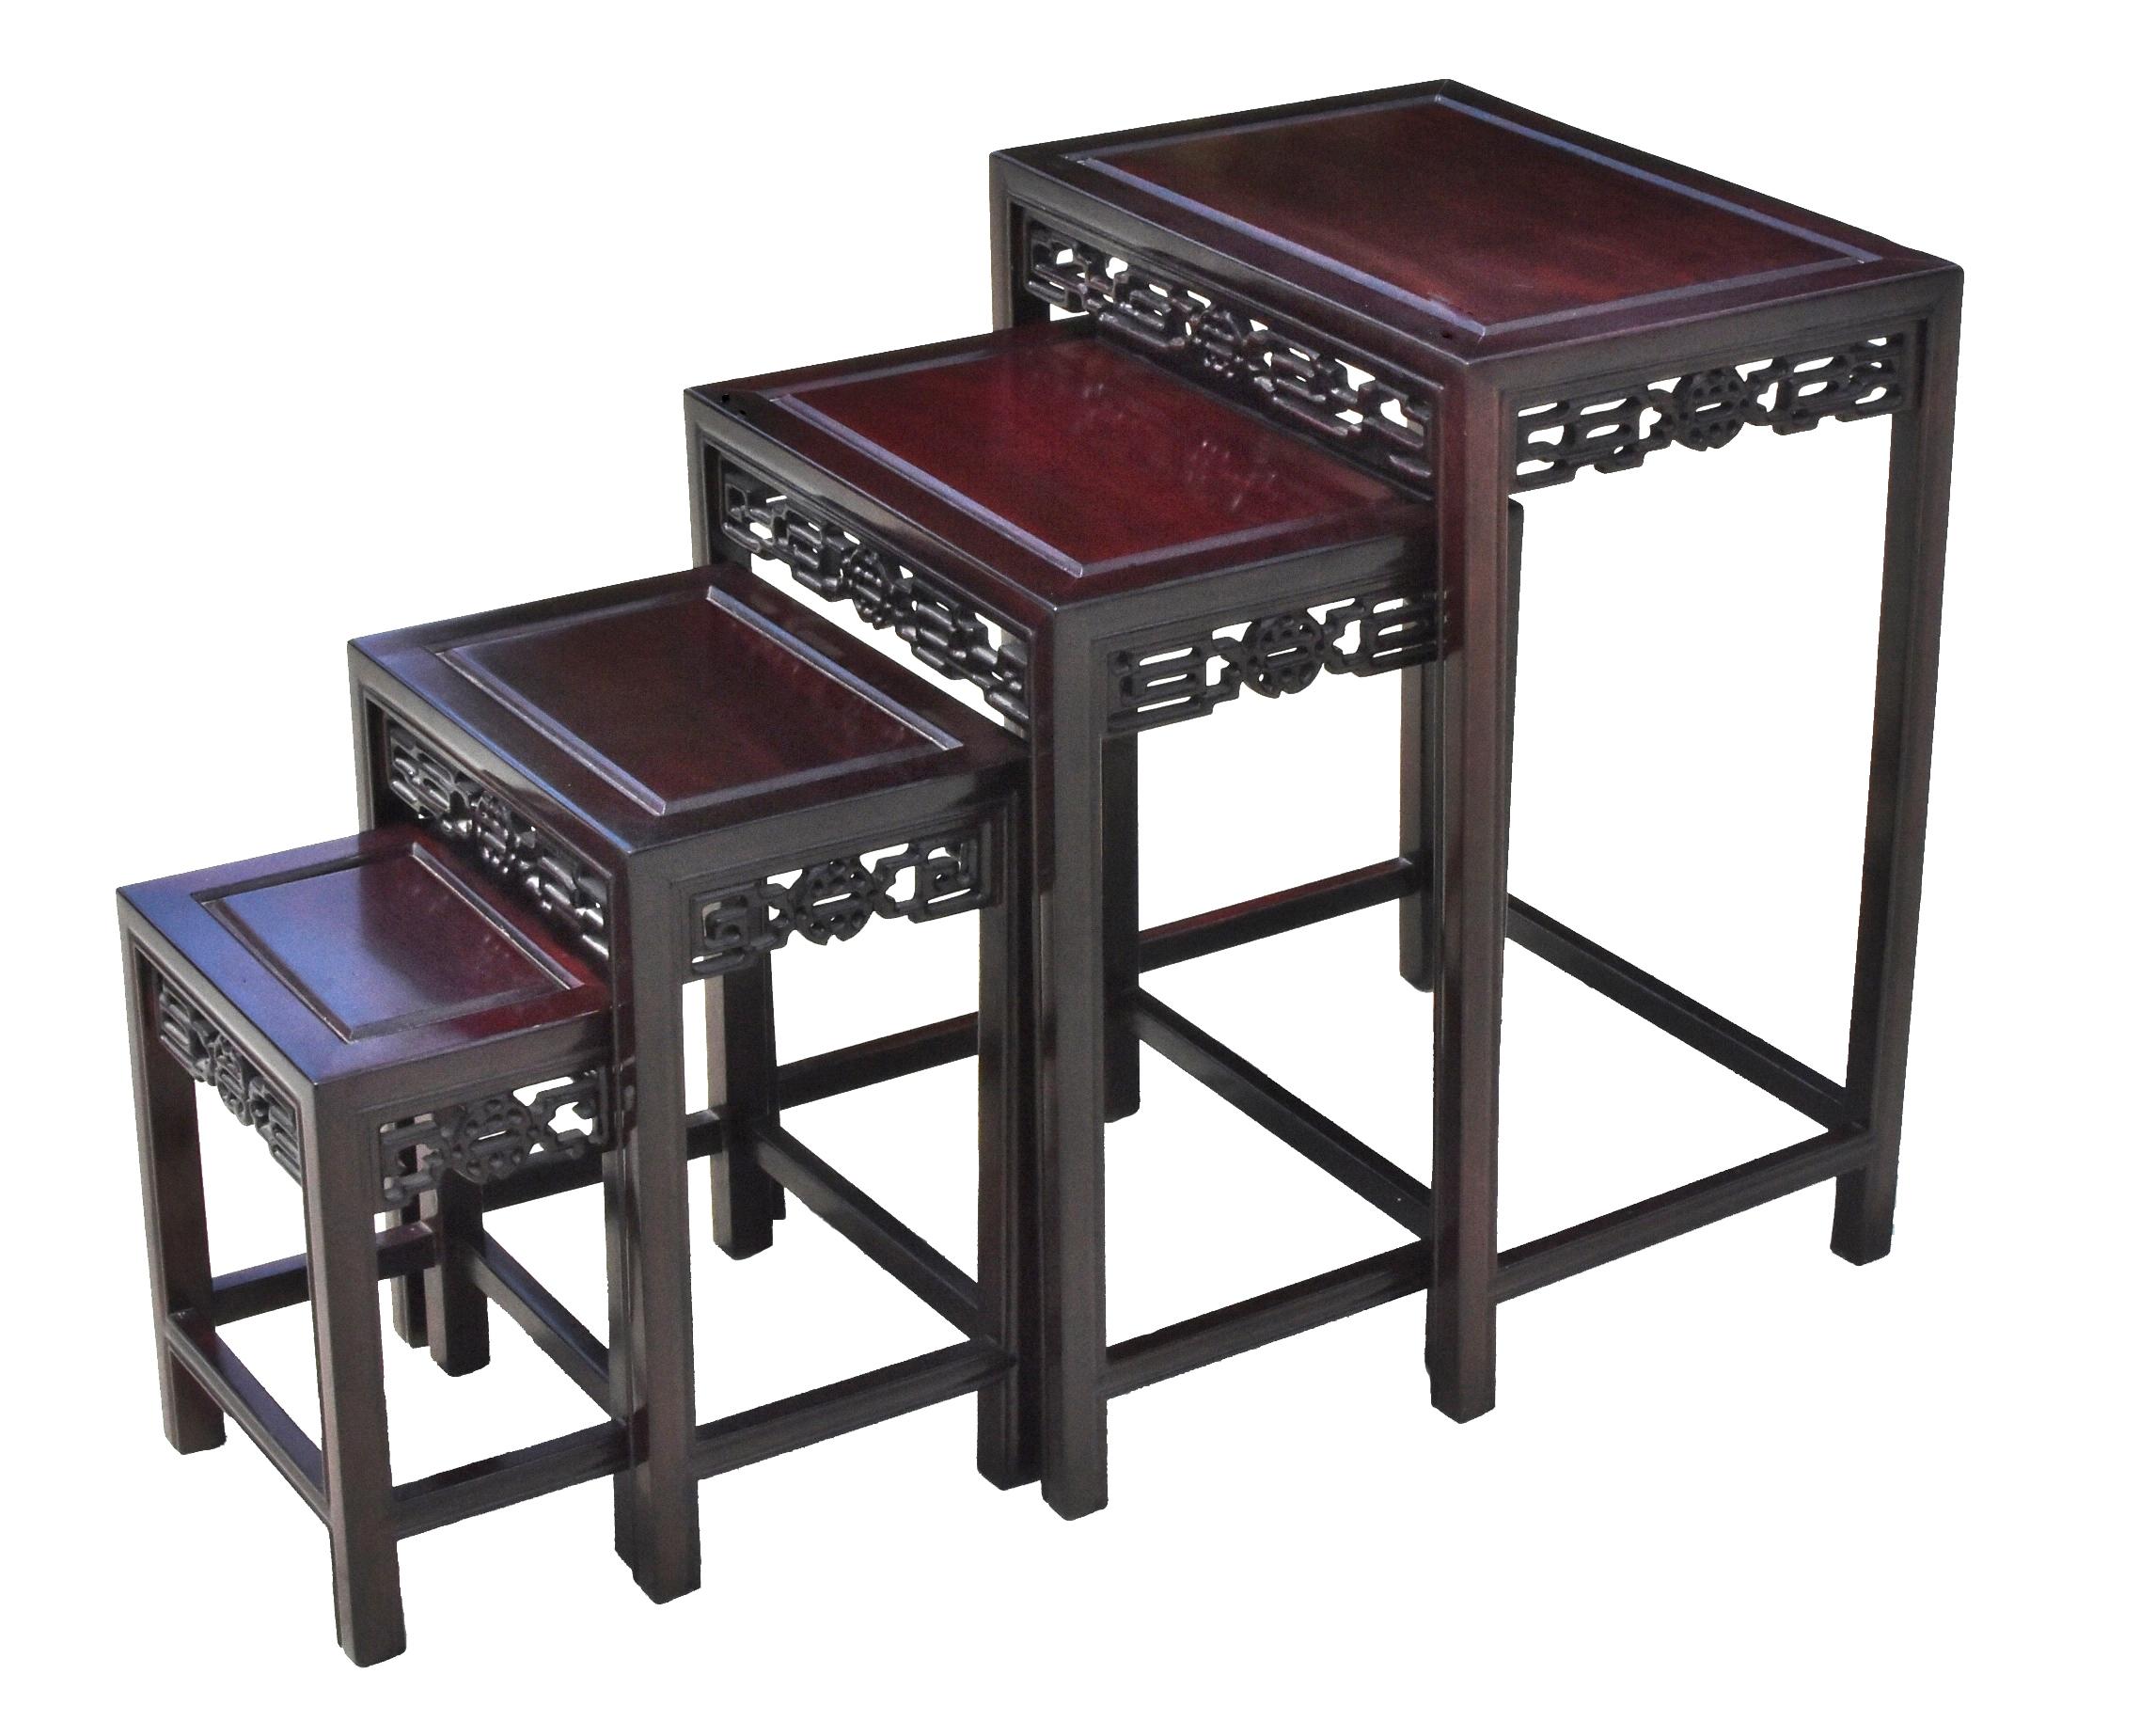 Extraordinary set of four nesting tables in excellent condition. Beautiful fine grade solid rosewood. Carved scrolls of longevity motifs. Prized wood needs no further decoration. Set of 4 tables tuck away and pull out easily. Used individually or